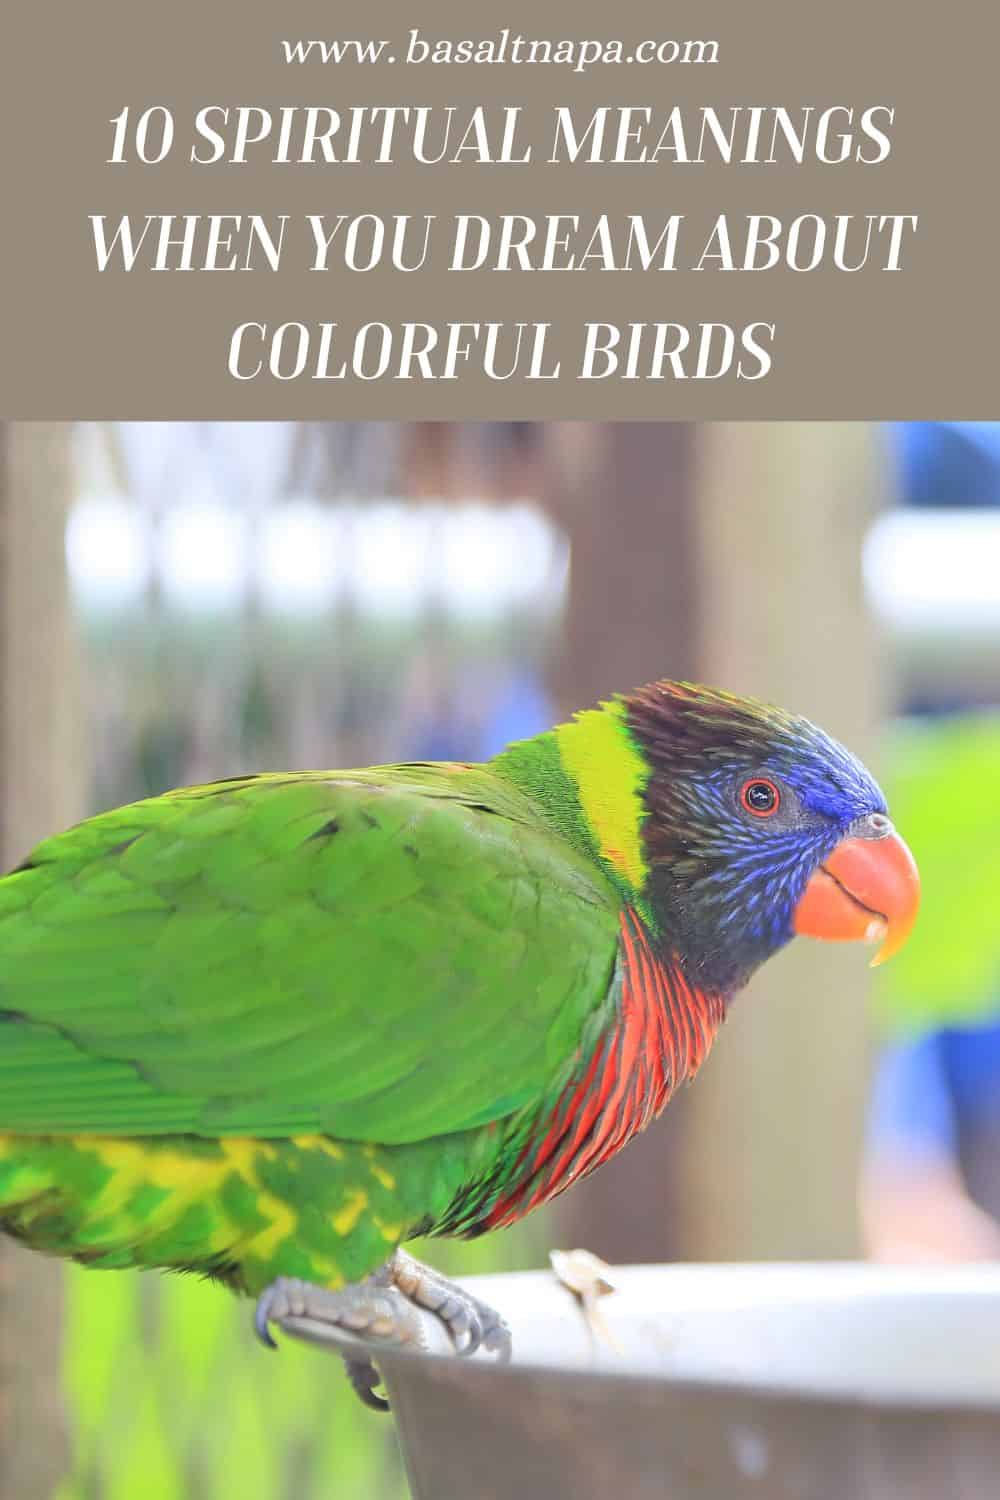 10 Spiritual Meanings When You Dream About Colorful Birds